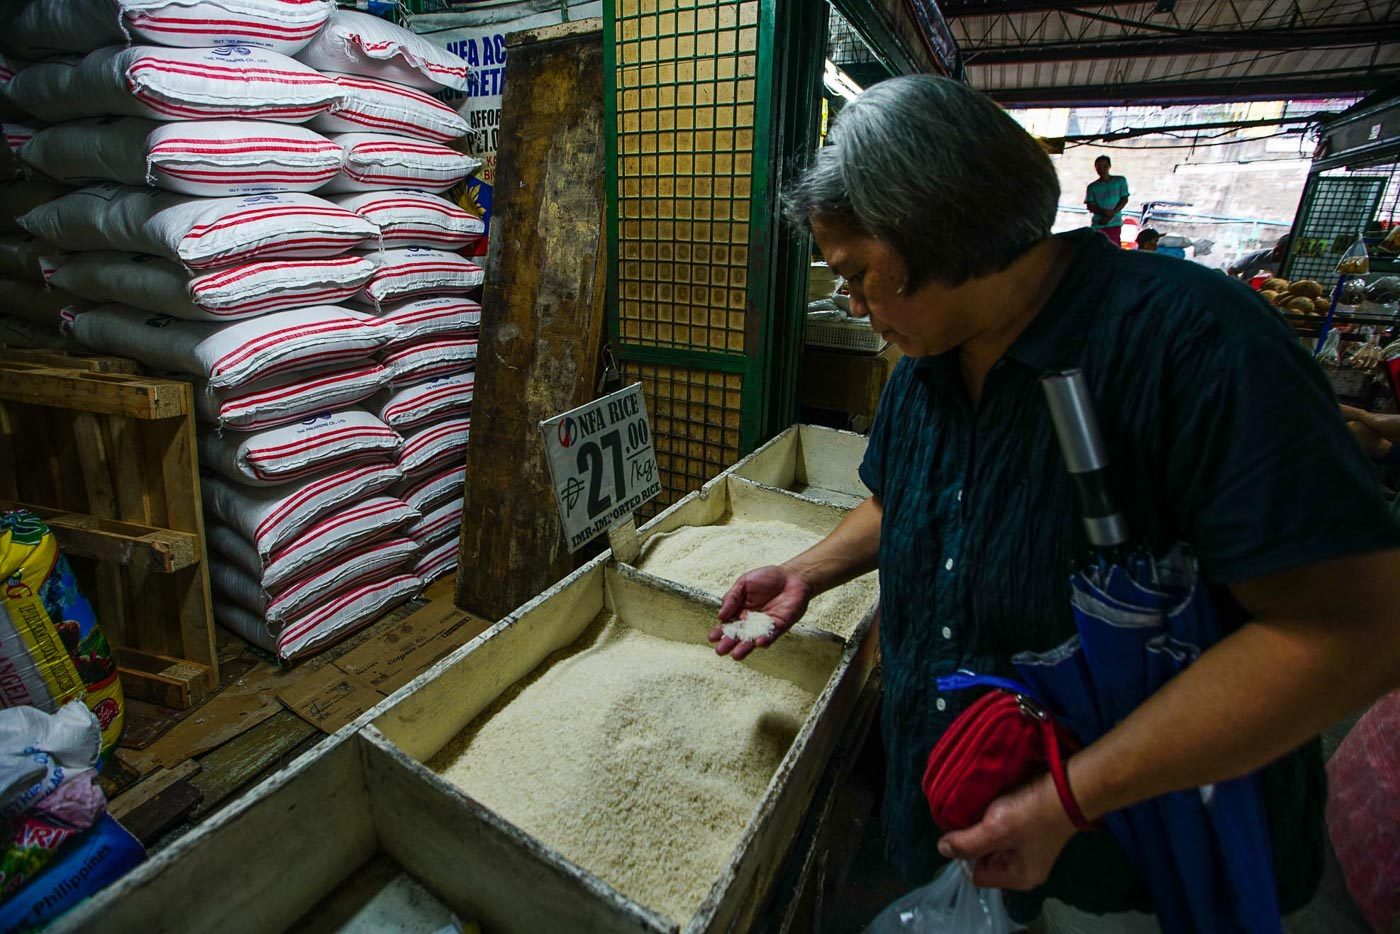 NFA’s diversion of funds to loans caused rice shortage – COA